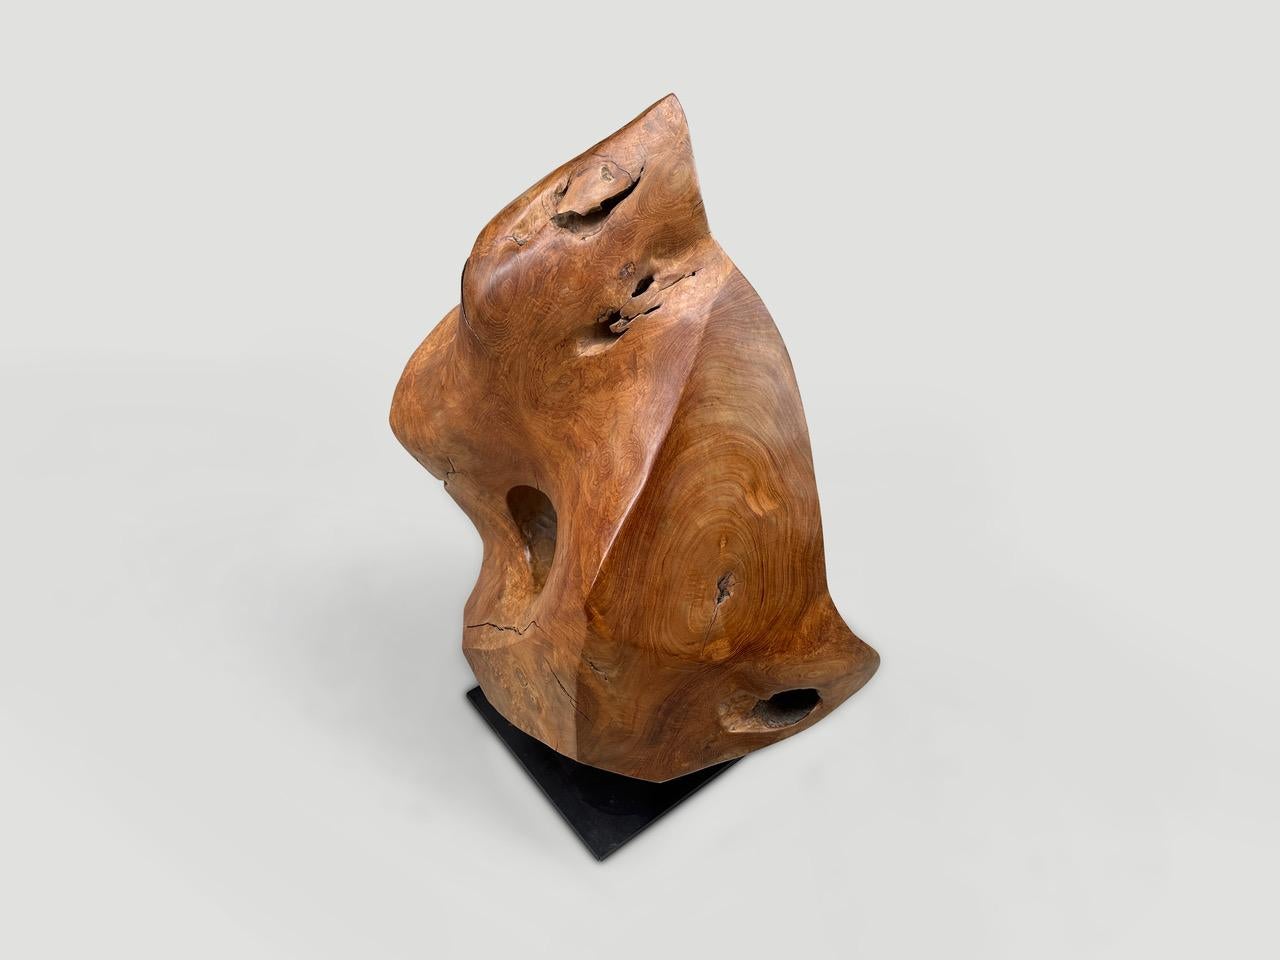 Andrianna Shamaris Minimalist Teak Wood Sculpture  In Excellent Condition For Sale In New York, NY